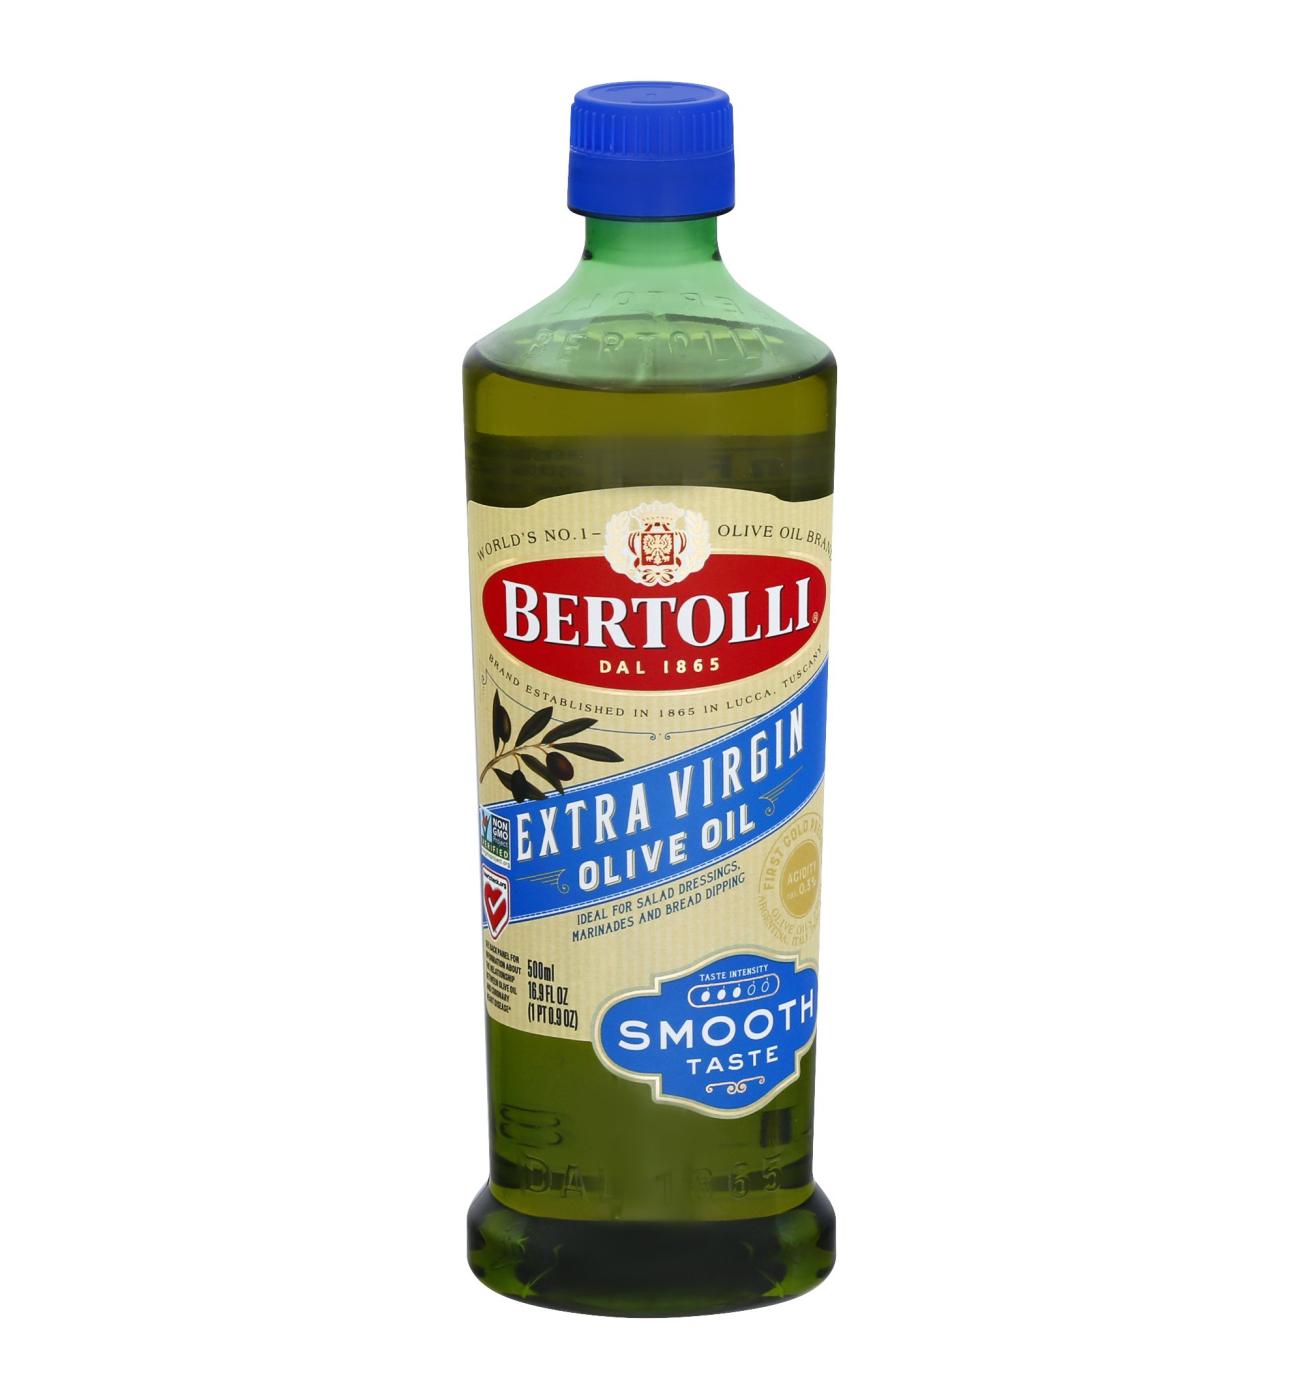 Bertolli Extra Virgin Olive Oil Smooth; image 1 of 2